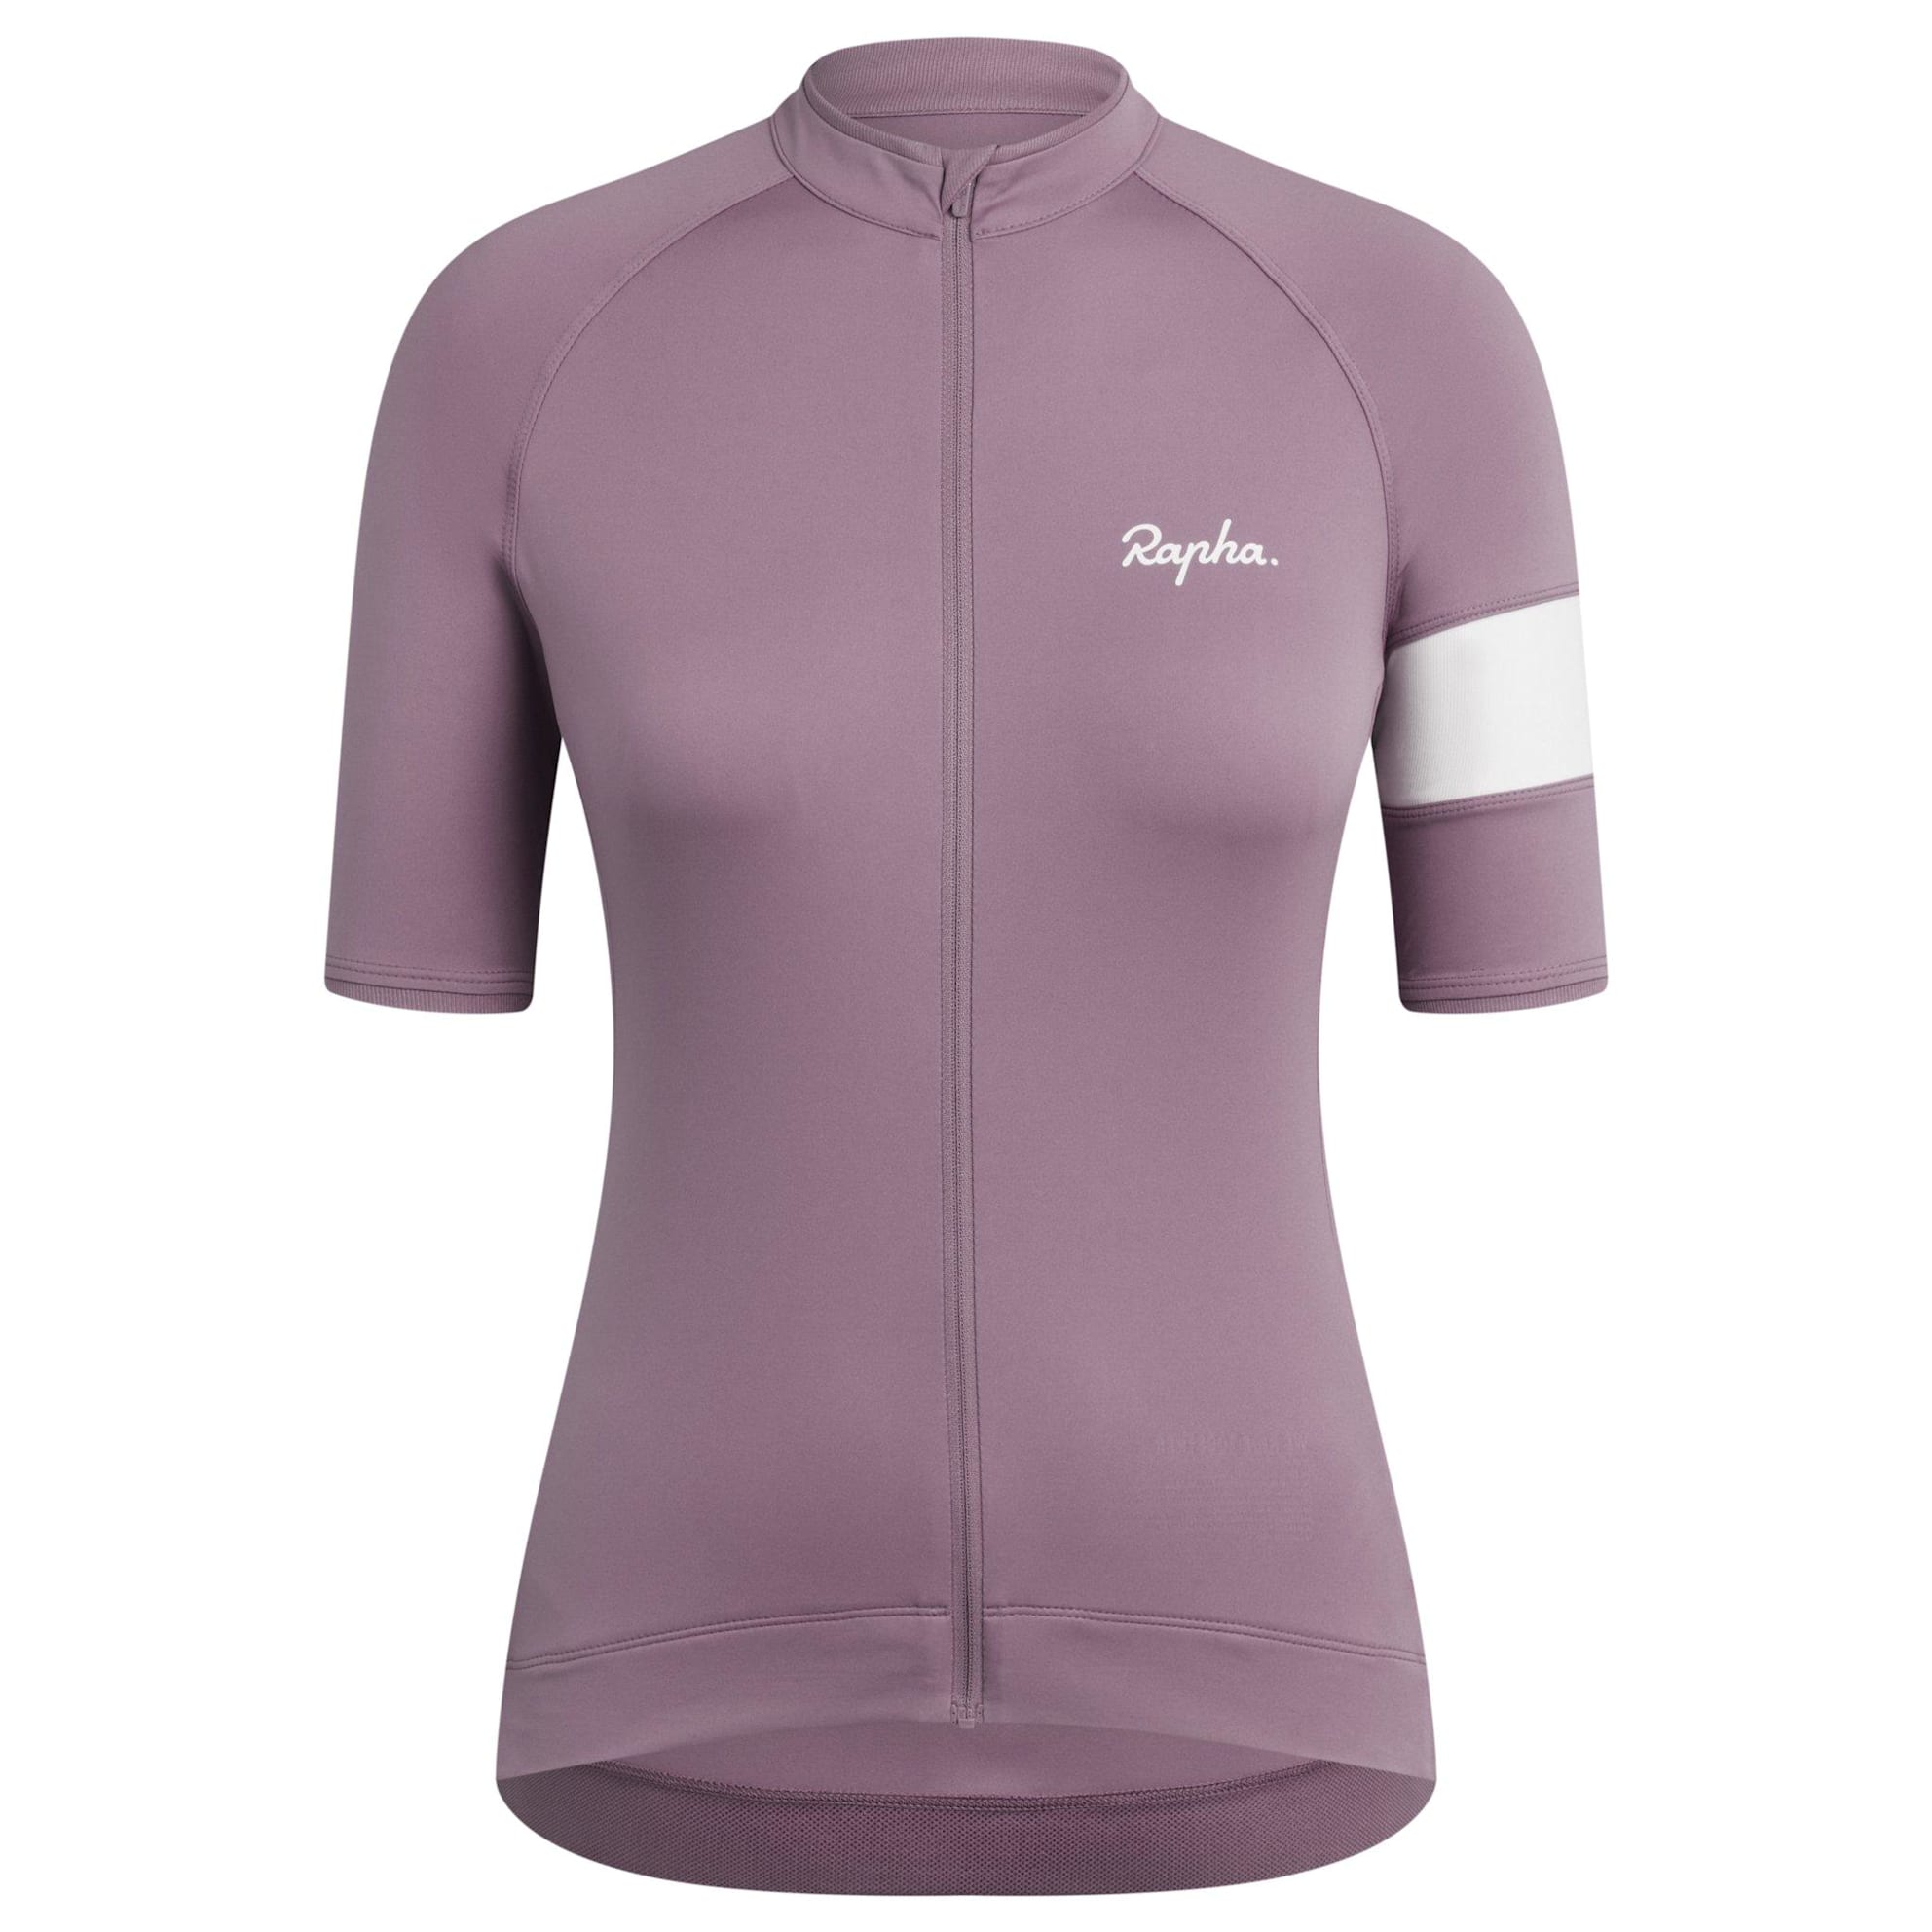 Rapha Cycling Clothing & Accessories | Rapha